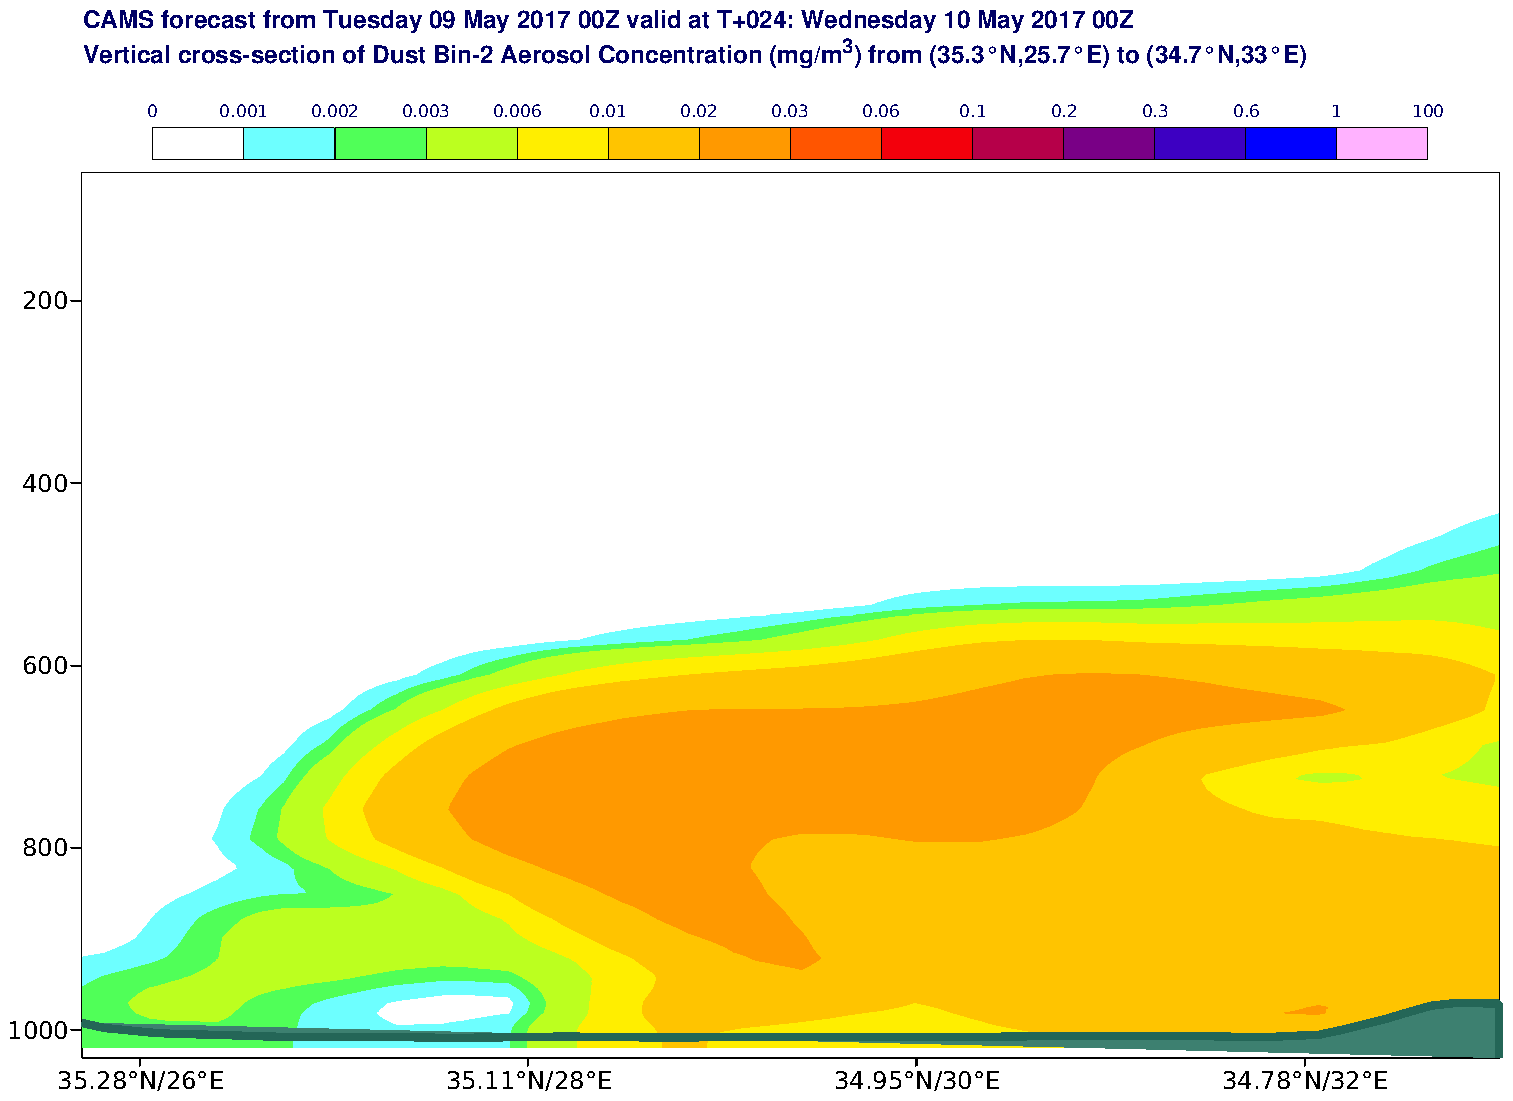 Vertical cross-section of Dust Bin-2 Aerosol Concentration (mg/m3) valid at T24 - 2017-05-10 00:00